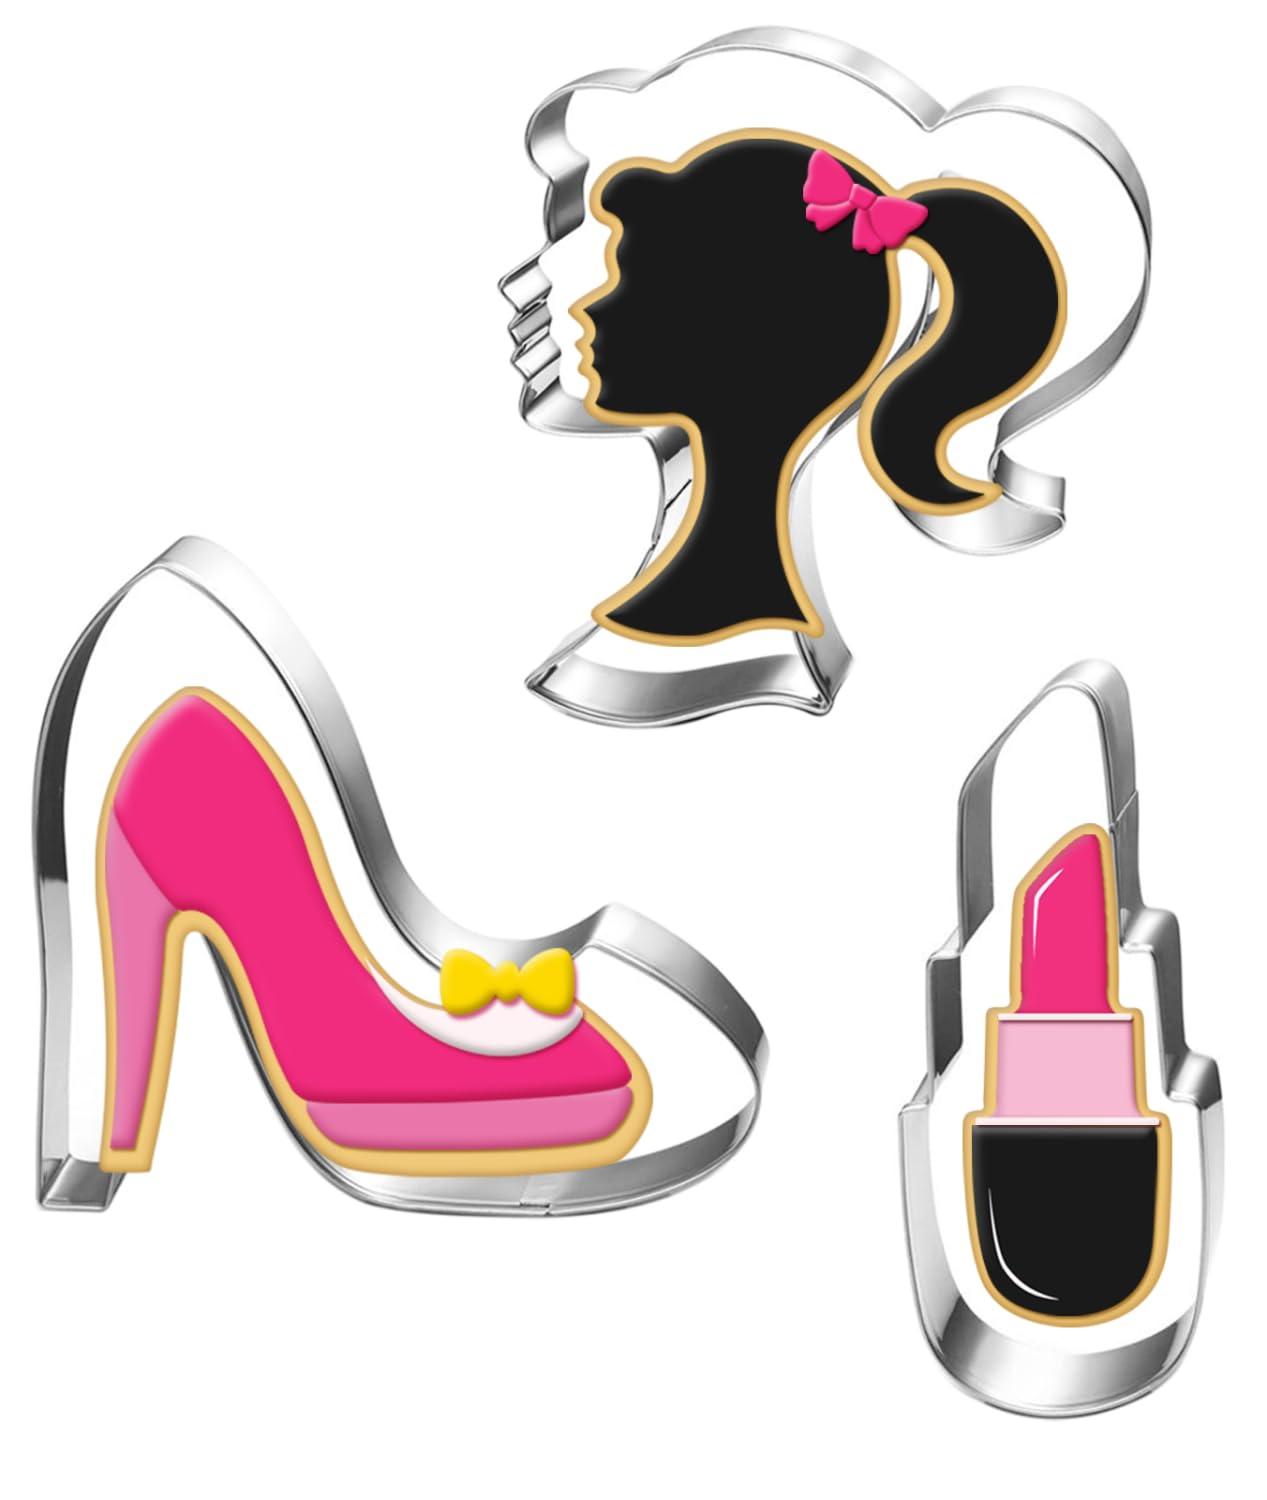 Auktosmn Fasion Girl Cookie Cutter Set-3 Piece-Dishwasher Safe-Doll Head, High Heel and Lipstick-Pink Girl Themed Fondant Biscui Cutters - CookCave